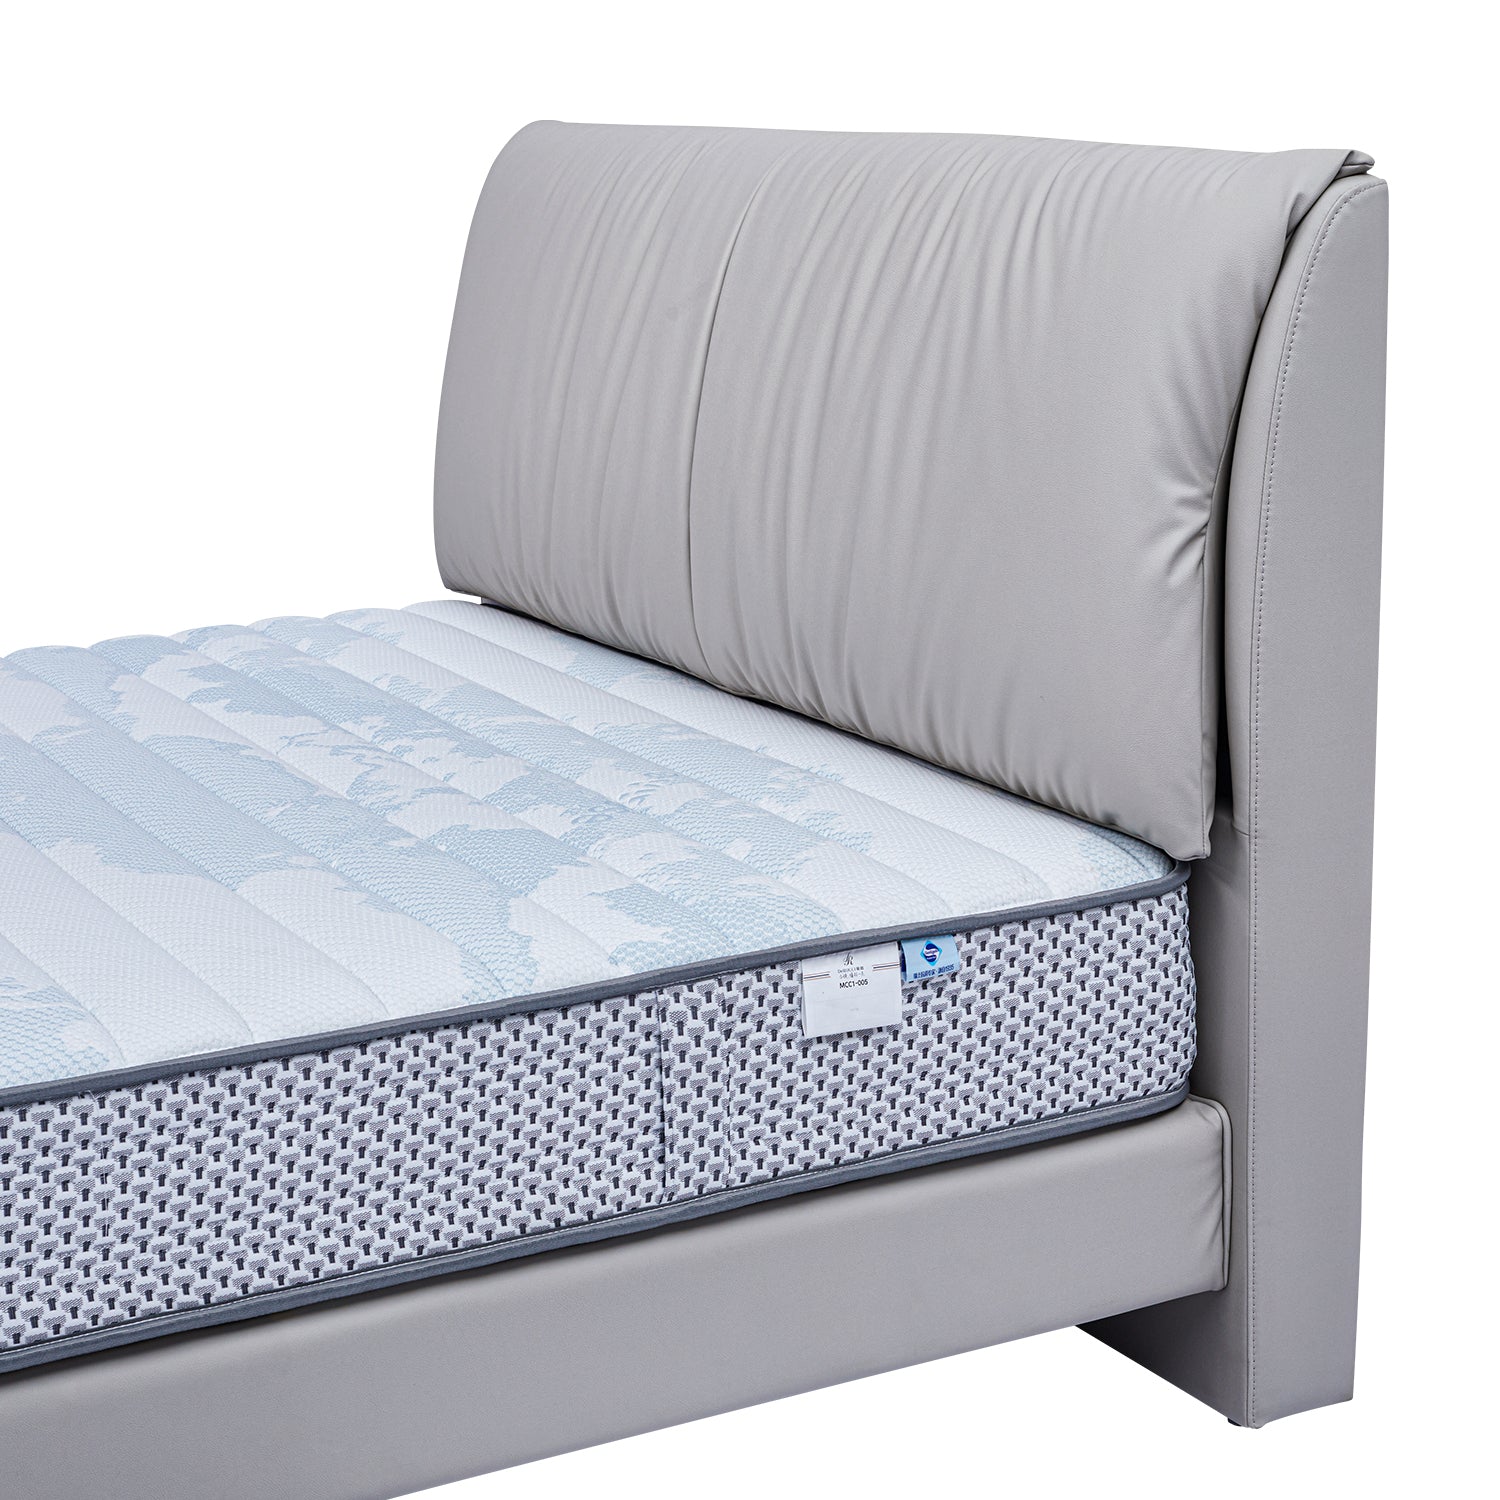 Close-up view of DeRUCCI's bed frame BOC1 - 012 with grey upholstered headboard and quilted grey and white mattress.